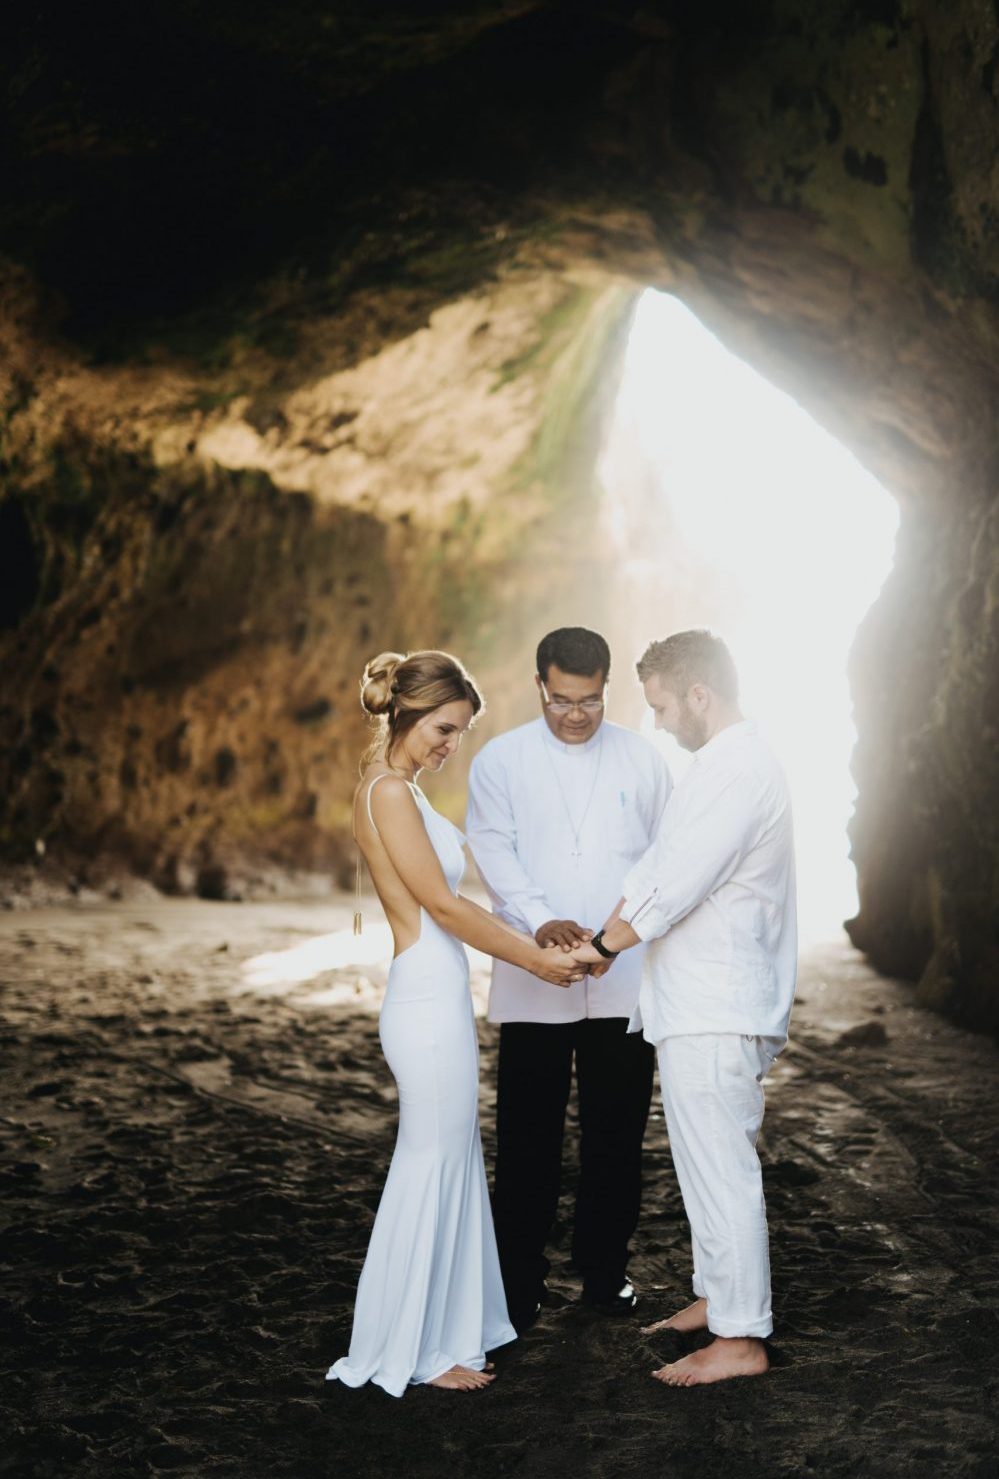 Wedding vows celebrated in a cave